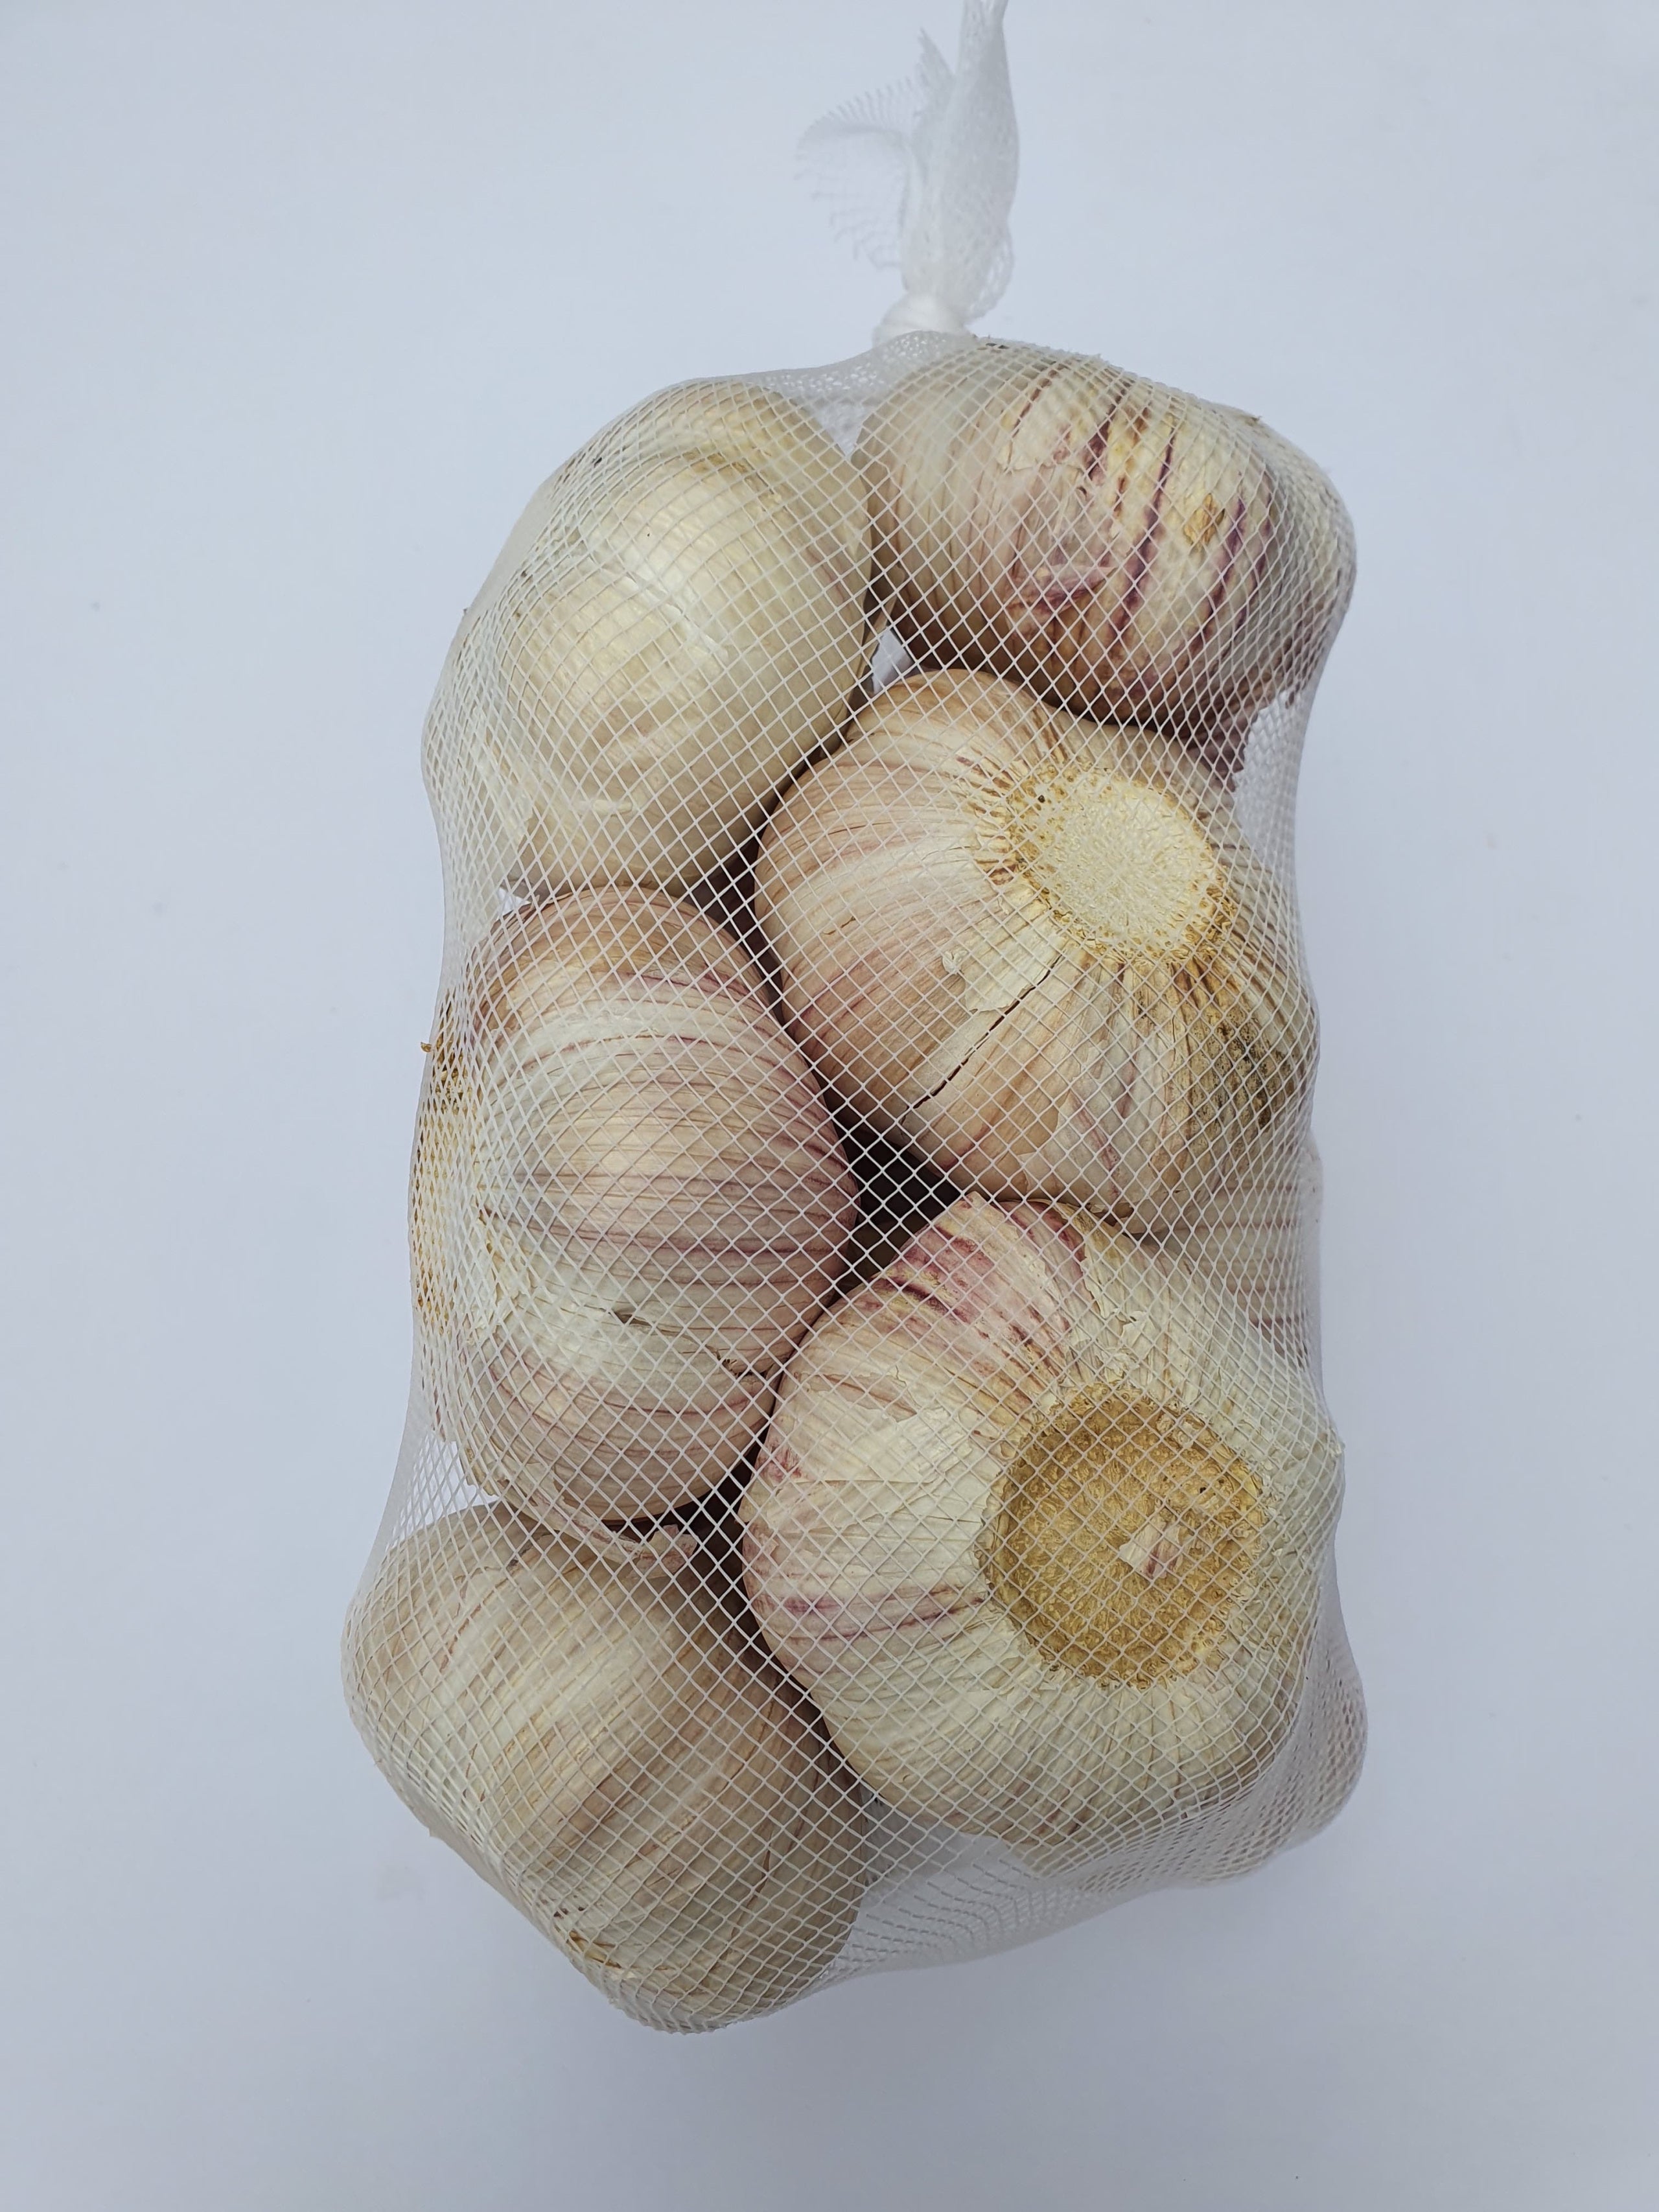 Garlic Mesh Bags Stock Photos and Pictures - 474 Images | Shutterstock